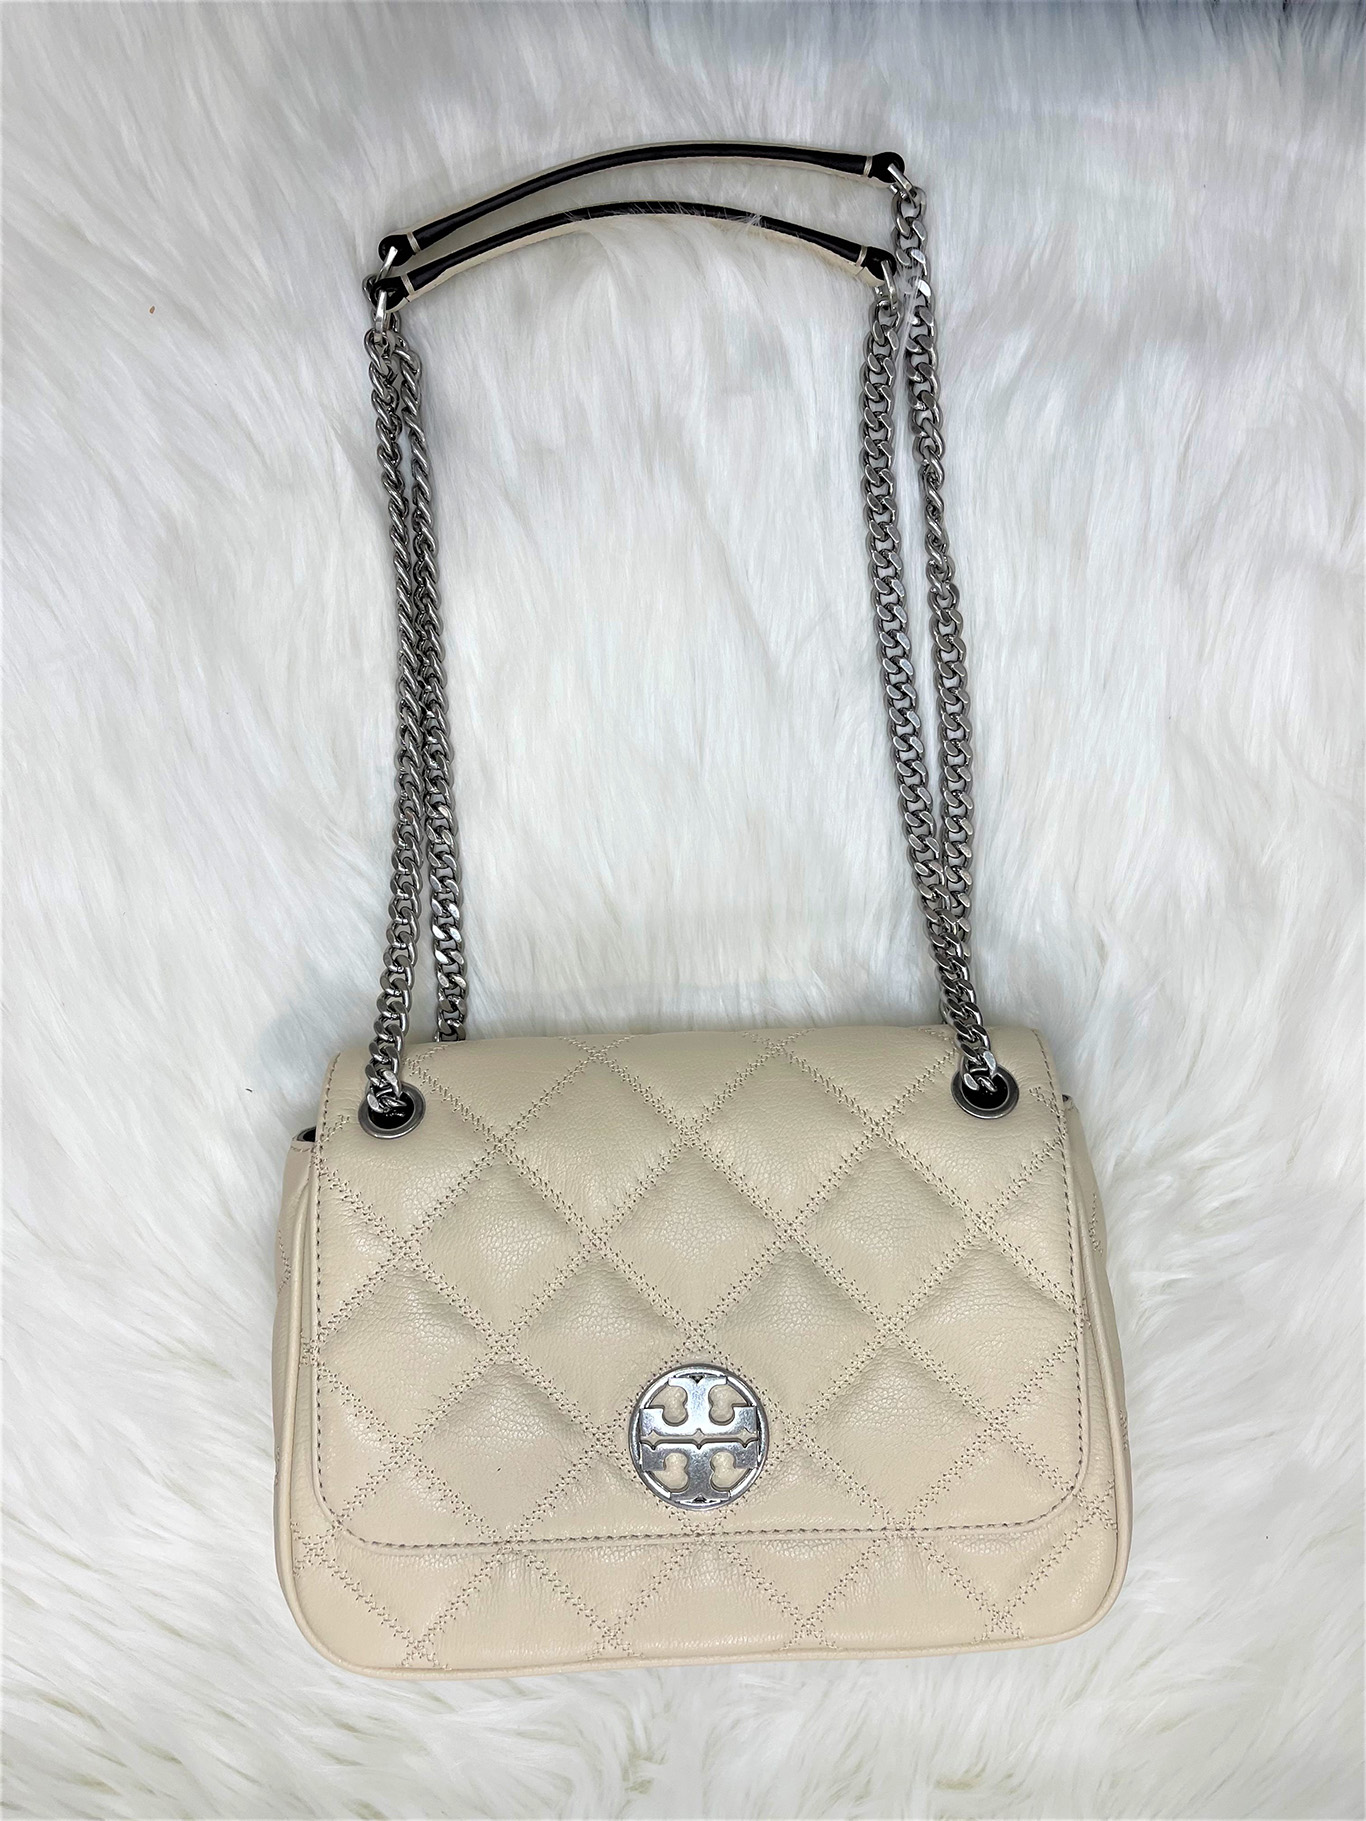 Tory burch Willa Small Shoulder Bag✨ Size 25 x 7 x 18 cm 100% Authentic✨  Shop Now at Voluxe🤍 ——— Authentic for Everyone✨ 4.000+ pcs sold …